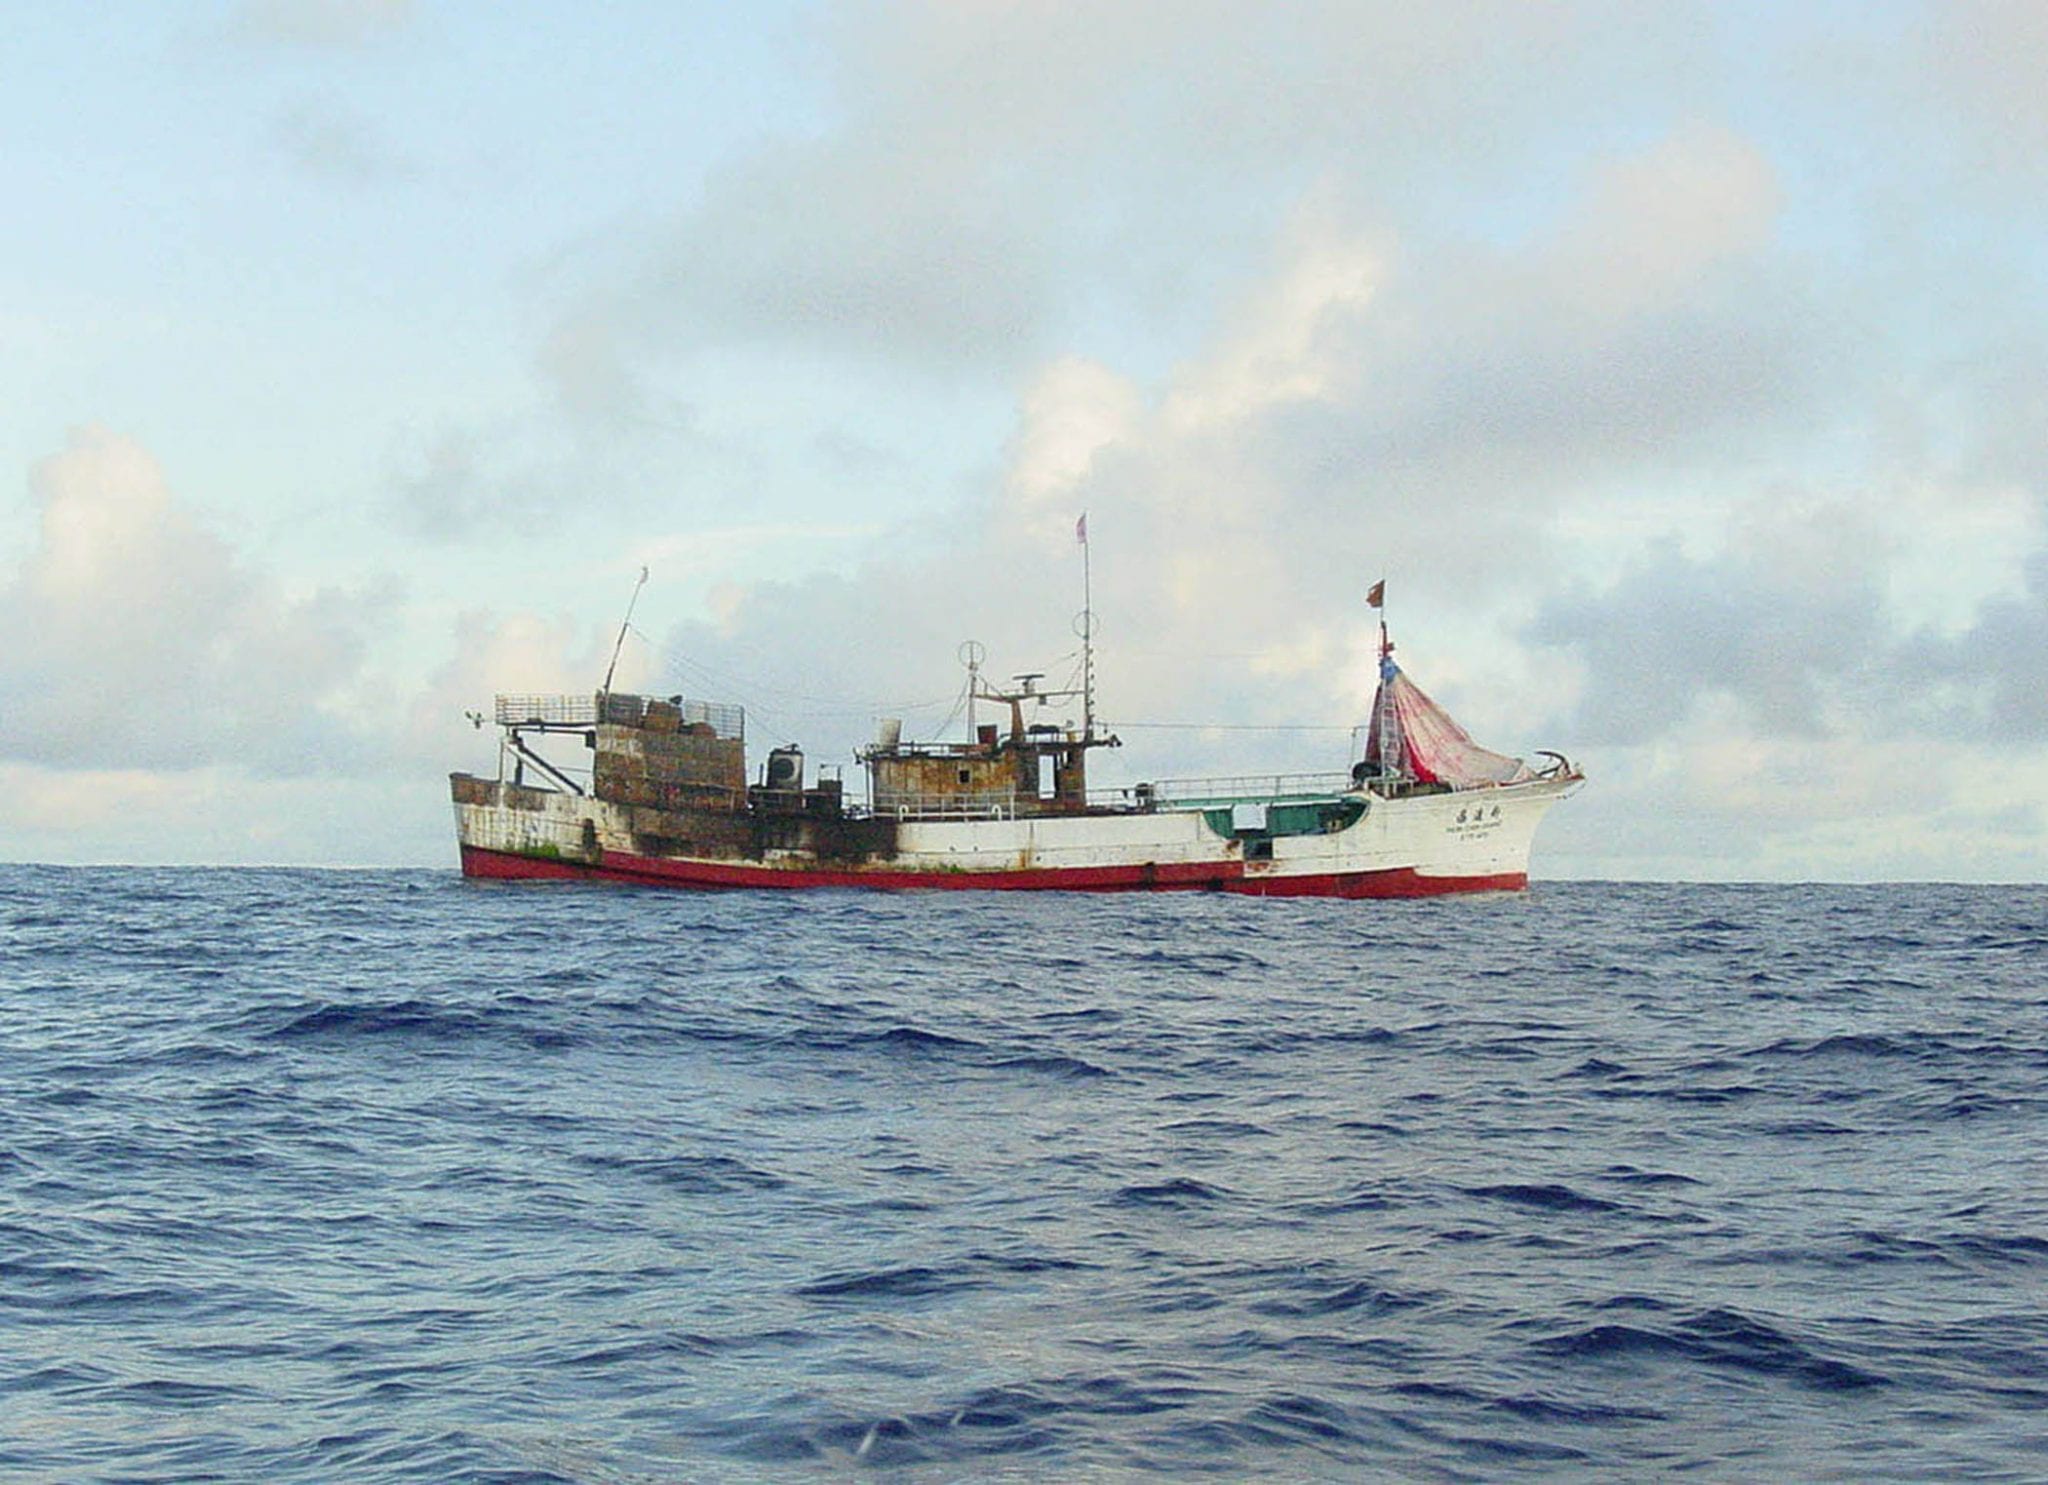 Distant Water Fishing Fleets – Preventing Forced Labour and Trafficking